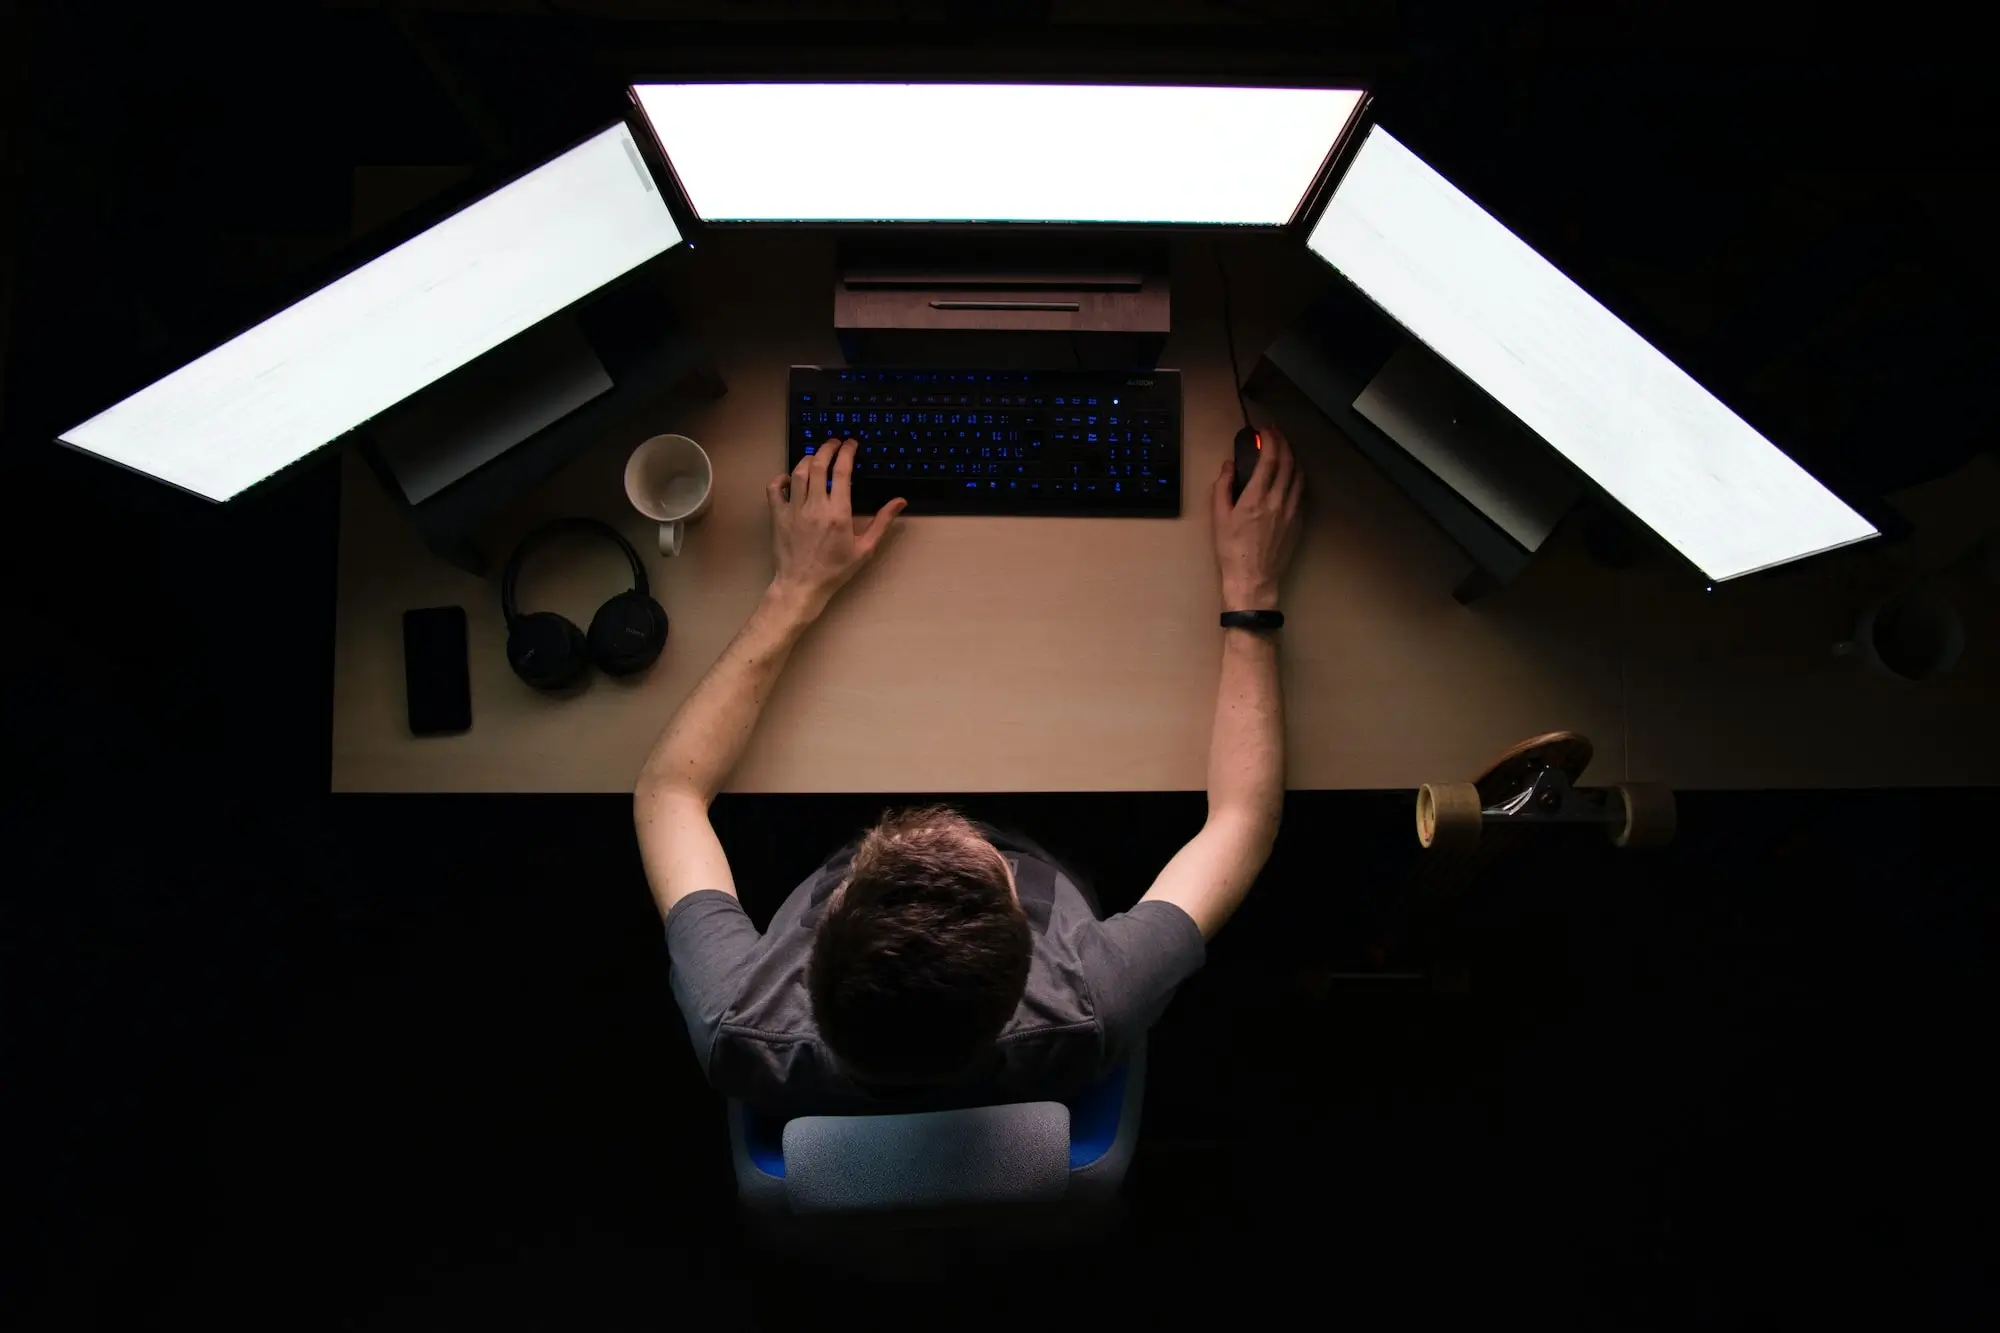 Software Developer sitting at his desk, three bright screens in front of him, a keyboard, coffee mug, smartphone and headphones laying next to him. Perspective from above